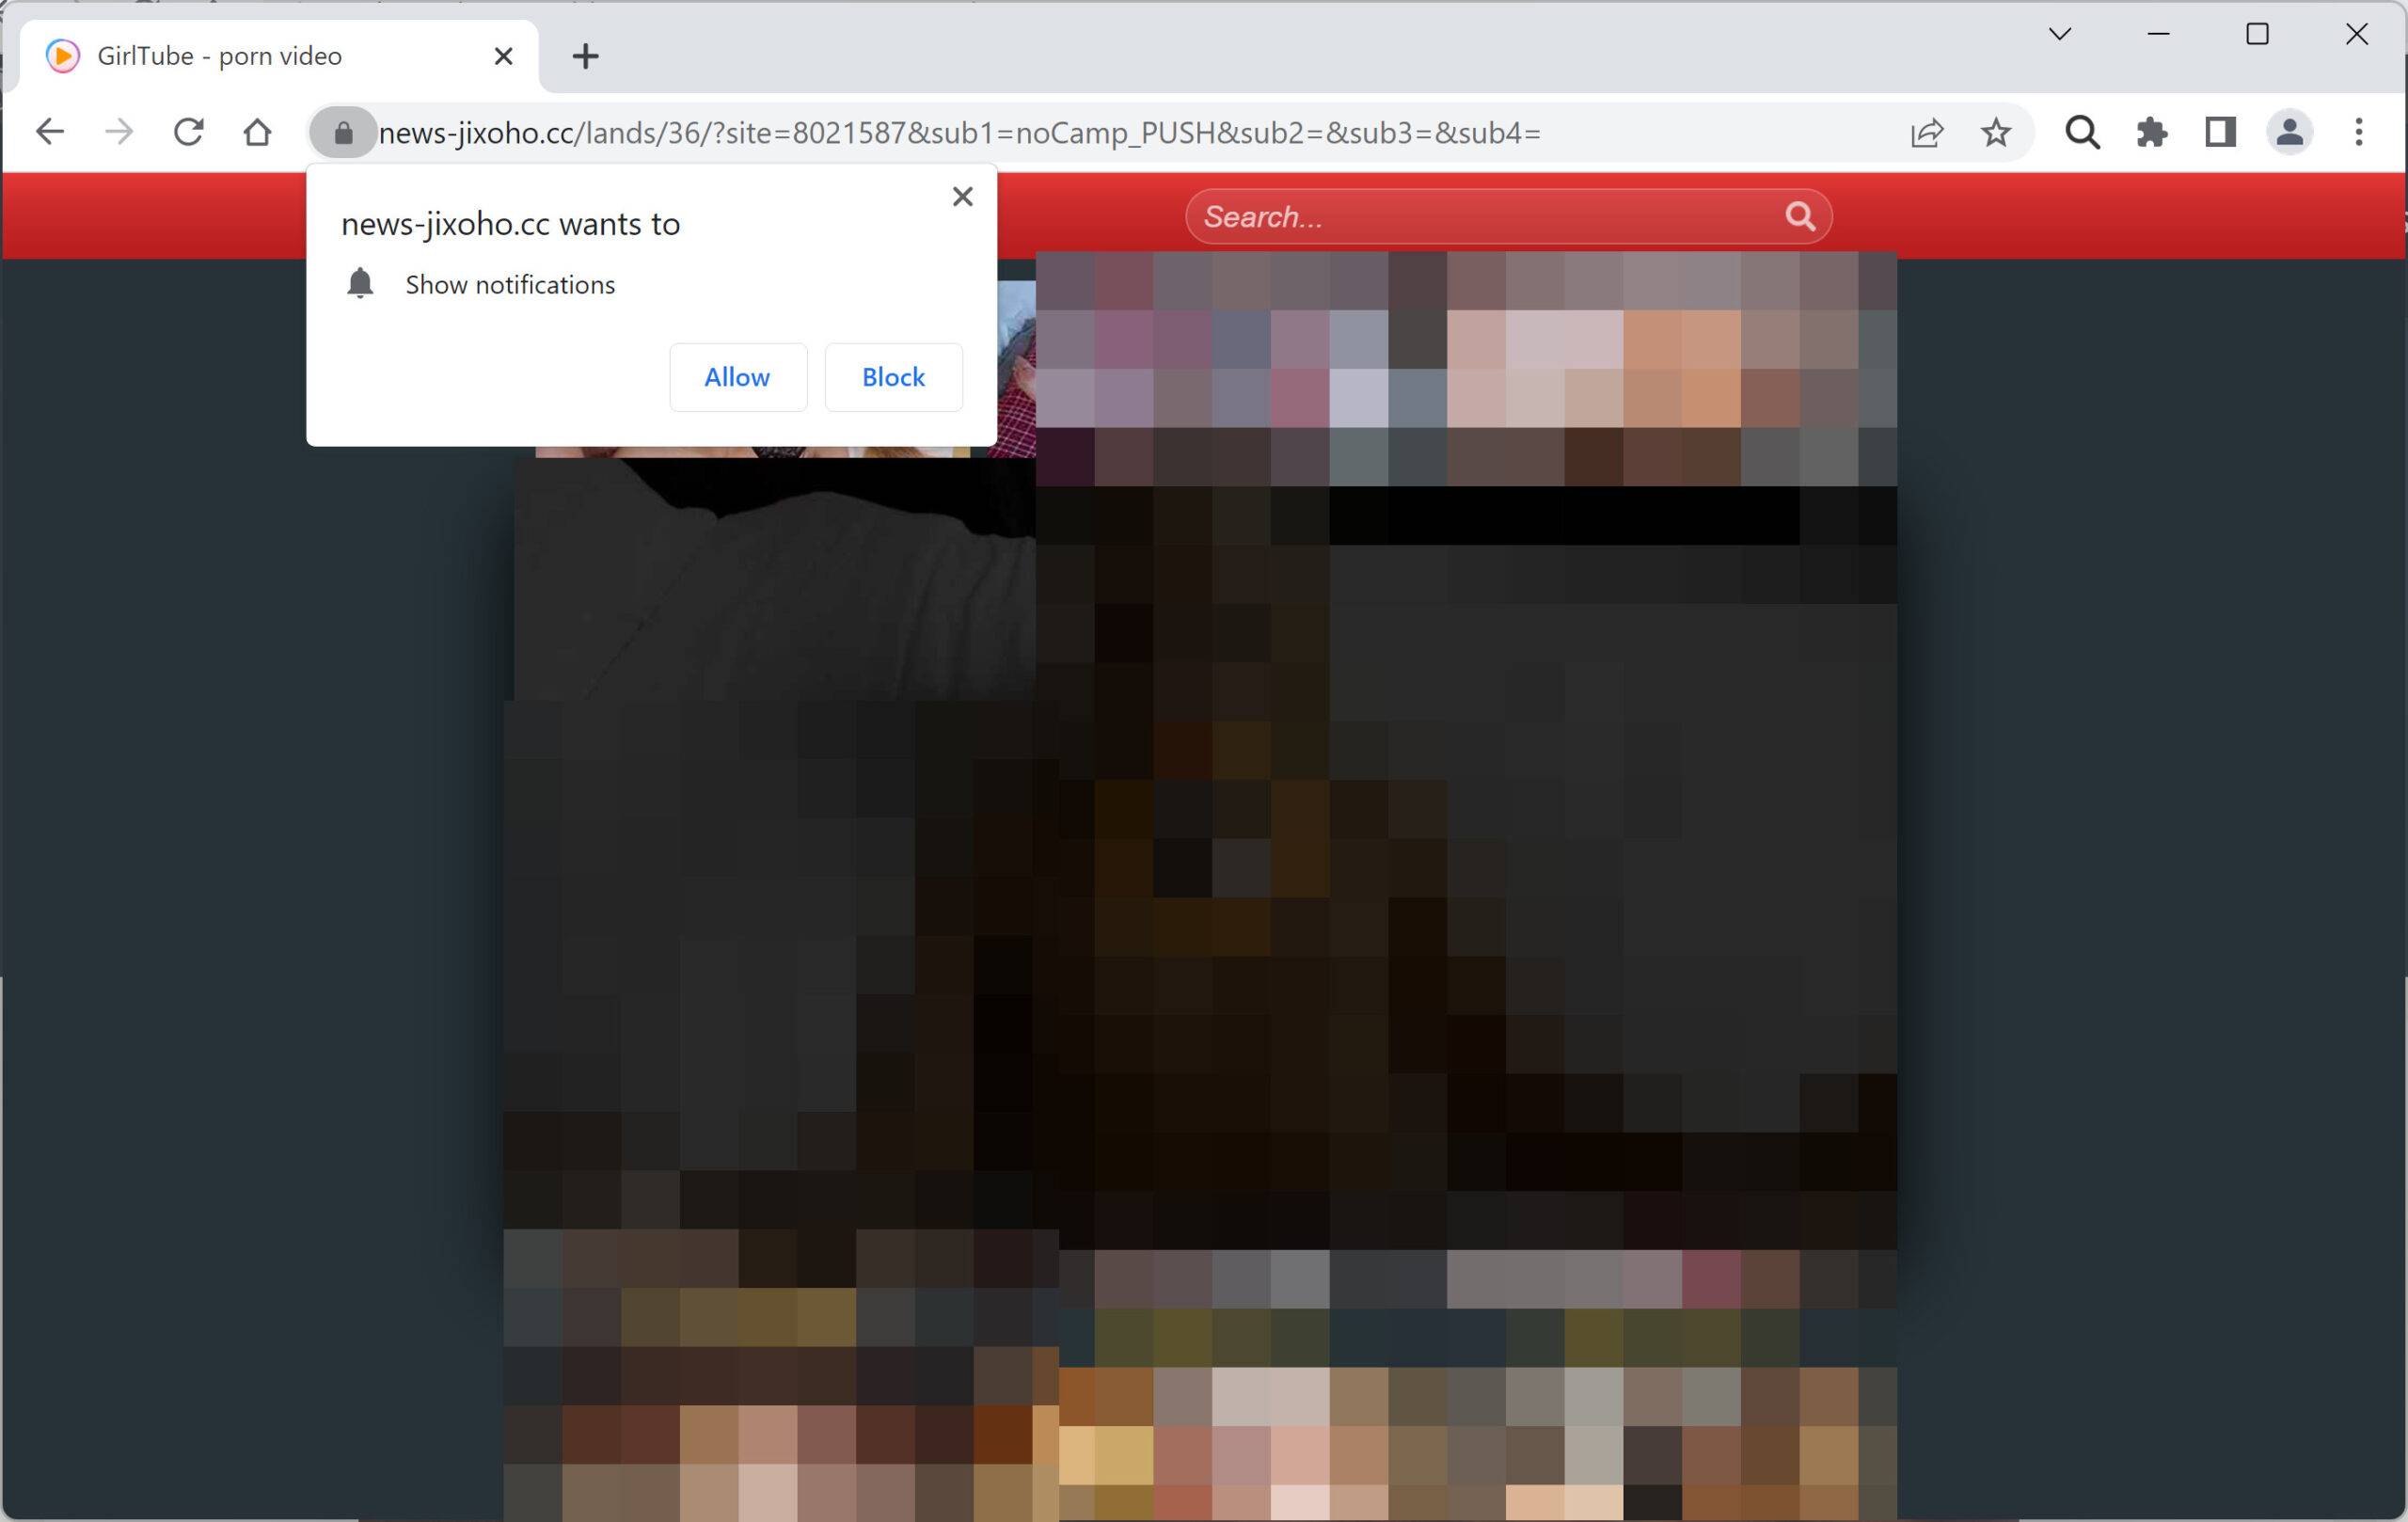 Whyam i getting ads on chrome for porn games